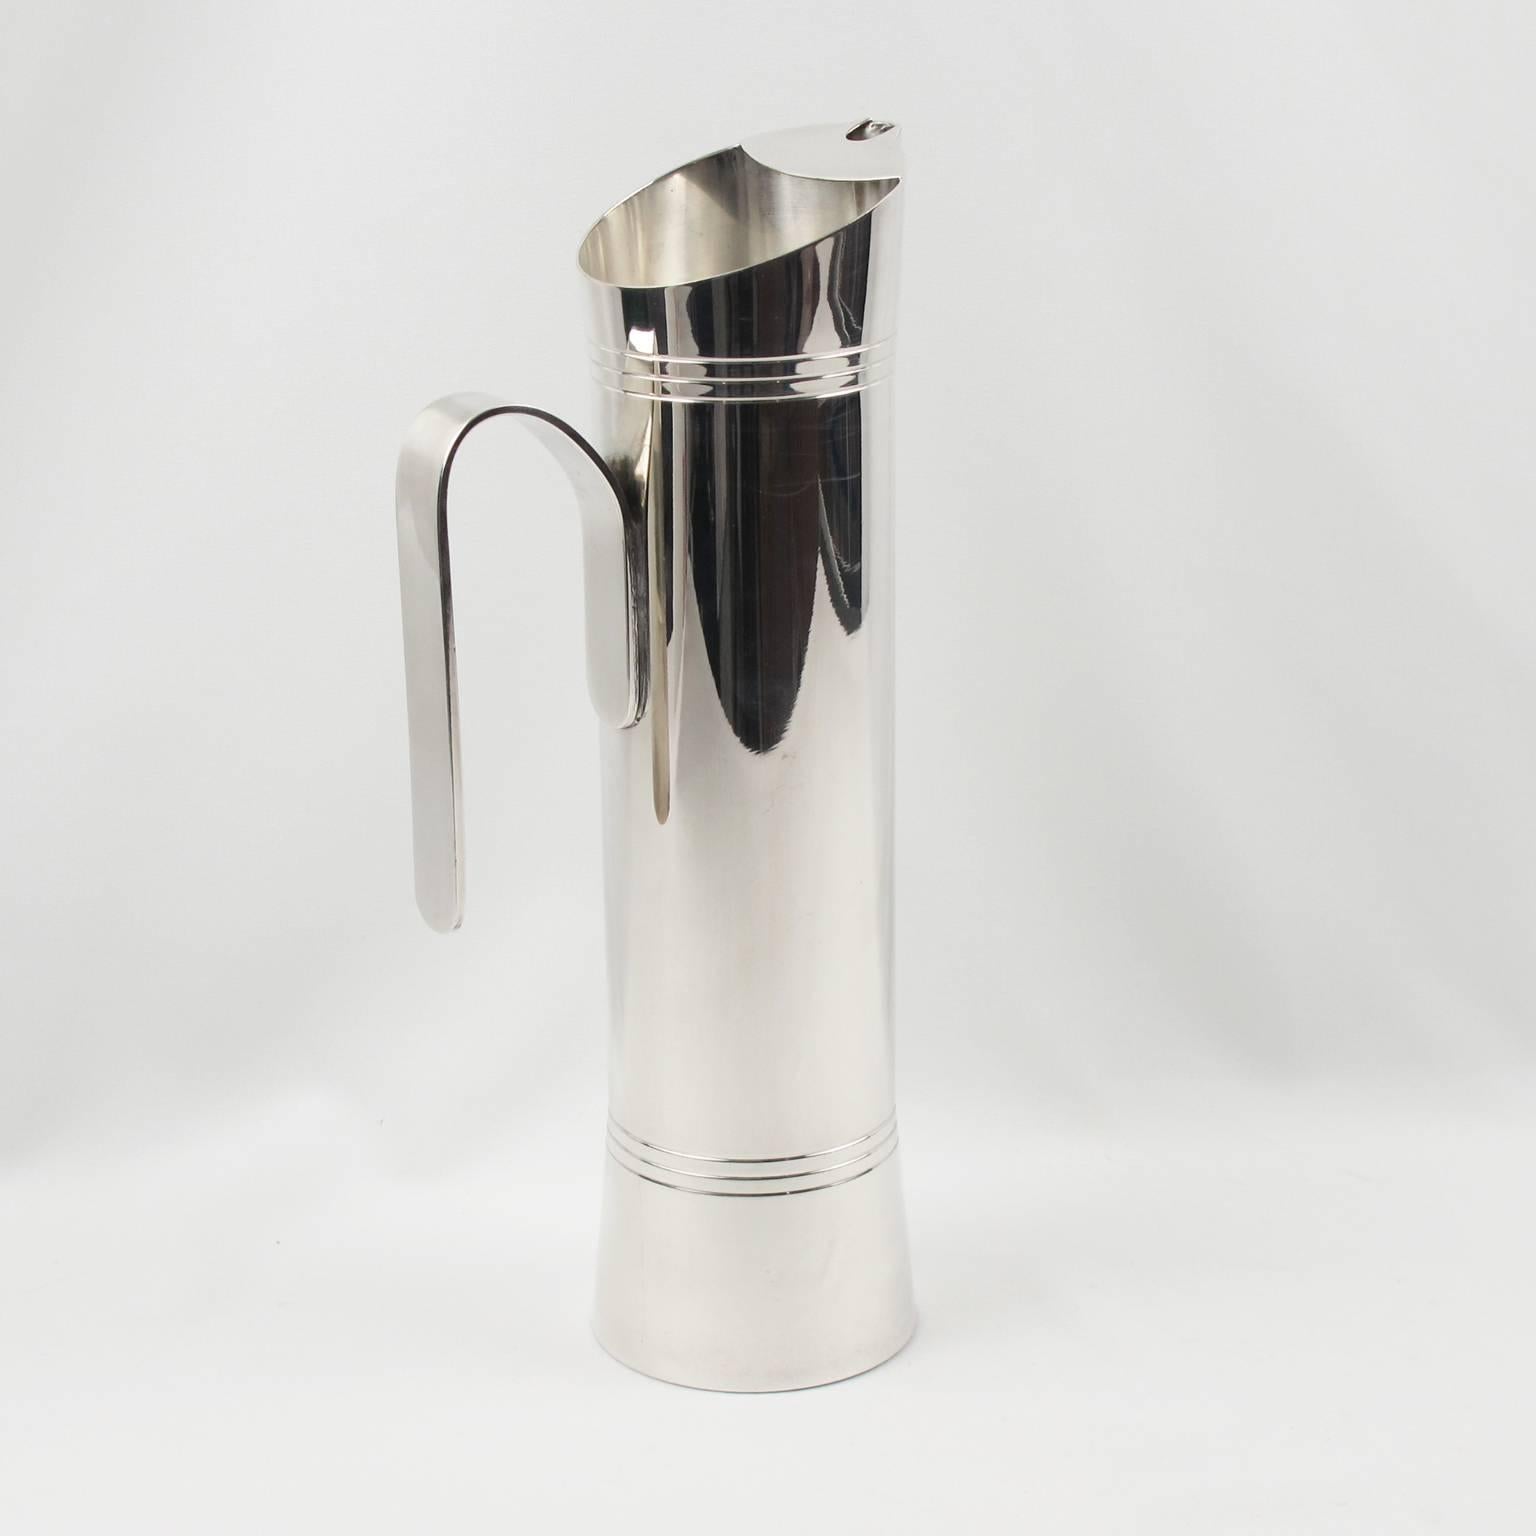 A streamline and minimalist barware accessory designed by Italian silver master Giuliano Bossi for Ibis, Milano. Sleek and modernist design with extra tall silver plate Martini pitcher. Marked underside: Silver plate - Ibis - GB (for Giuliano